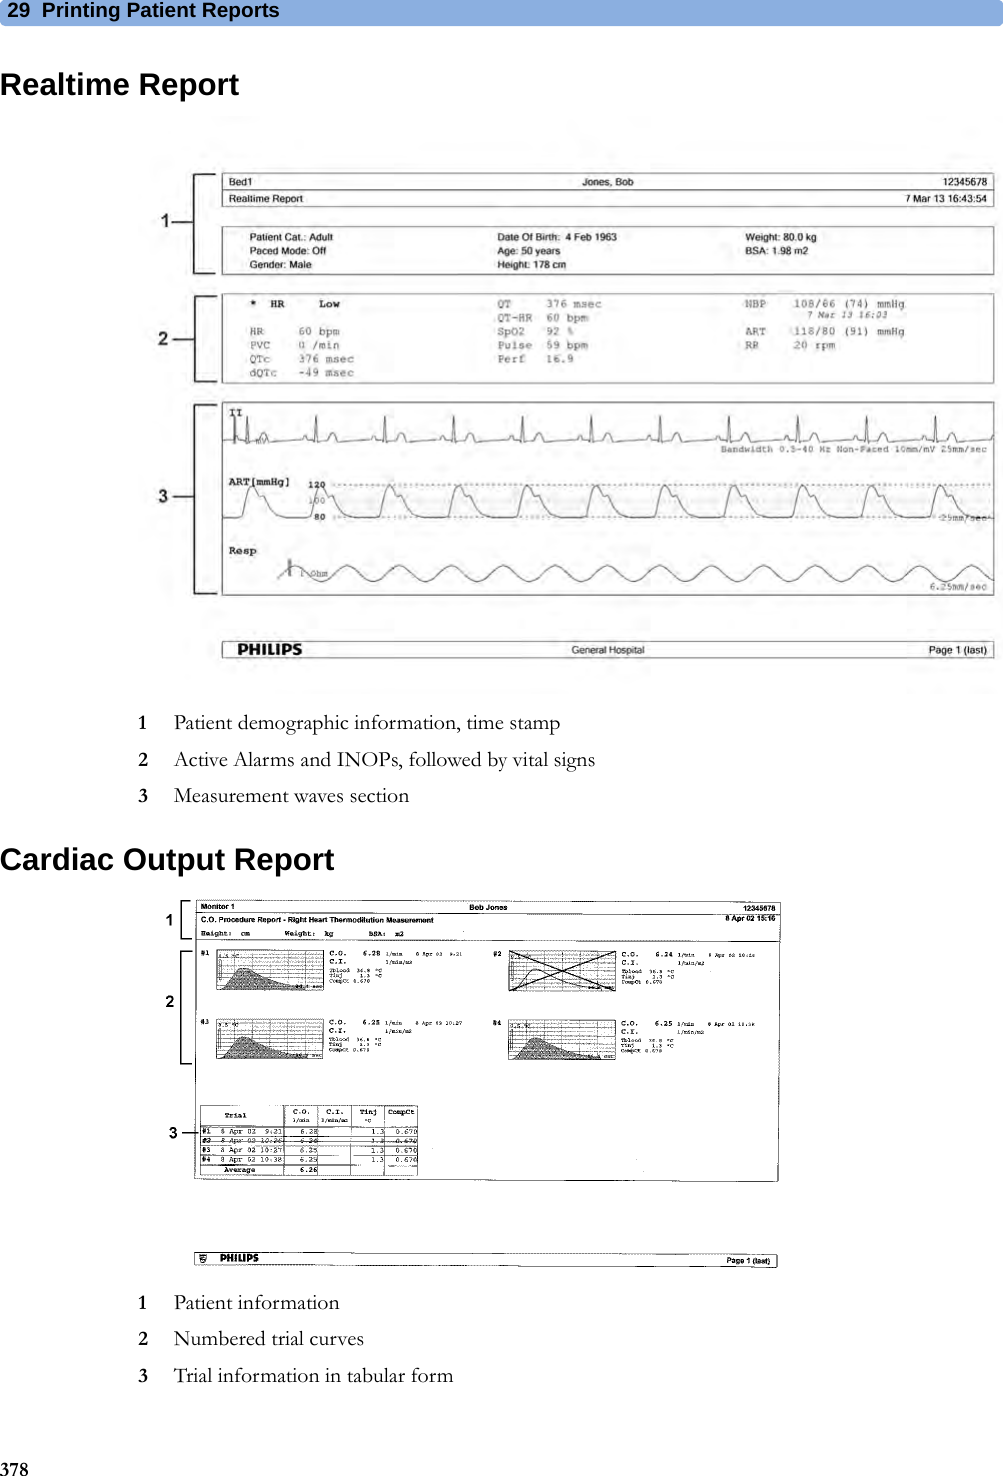 29 Printing Patient Reports378Realtime Report1Patient demographic information, time stamp2Active Alarms and INOPs, followed by vital signs3Measurement waves sectionCardiac Output Report1Patient information2Numbered trial curves3Trial information in tabular form